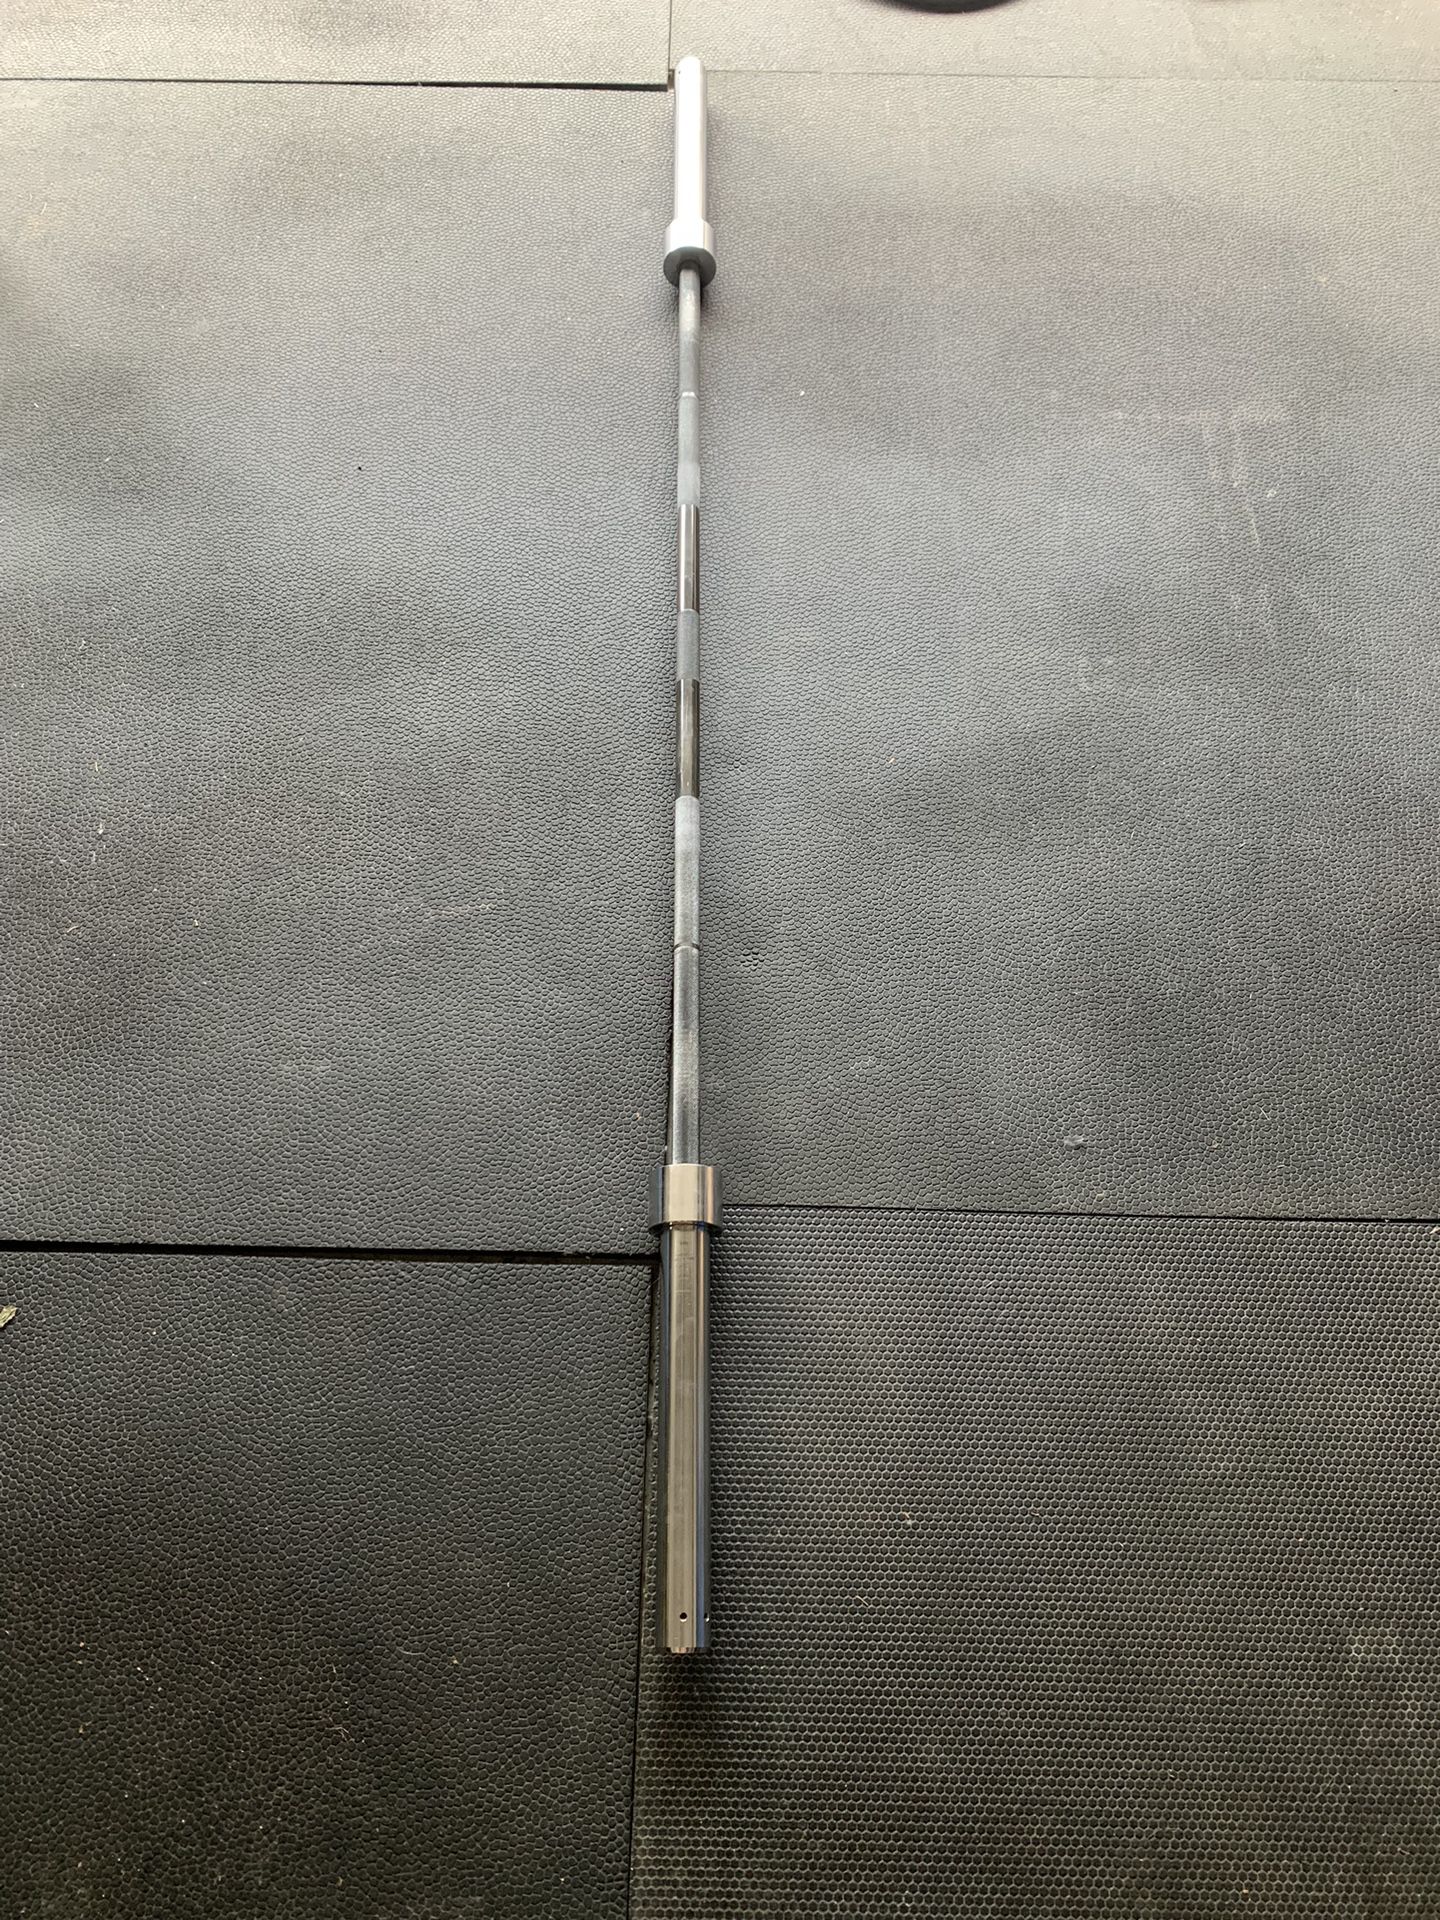 The “original” Texas Power Bar In Great Shape - Home Gym Weight Lifting Equipment 